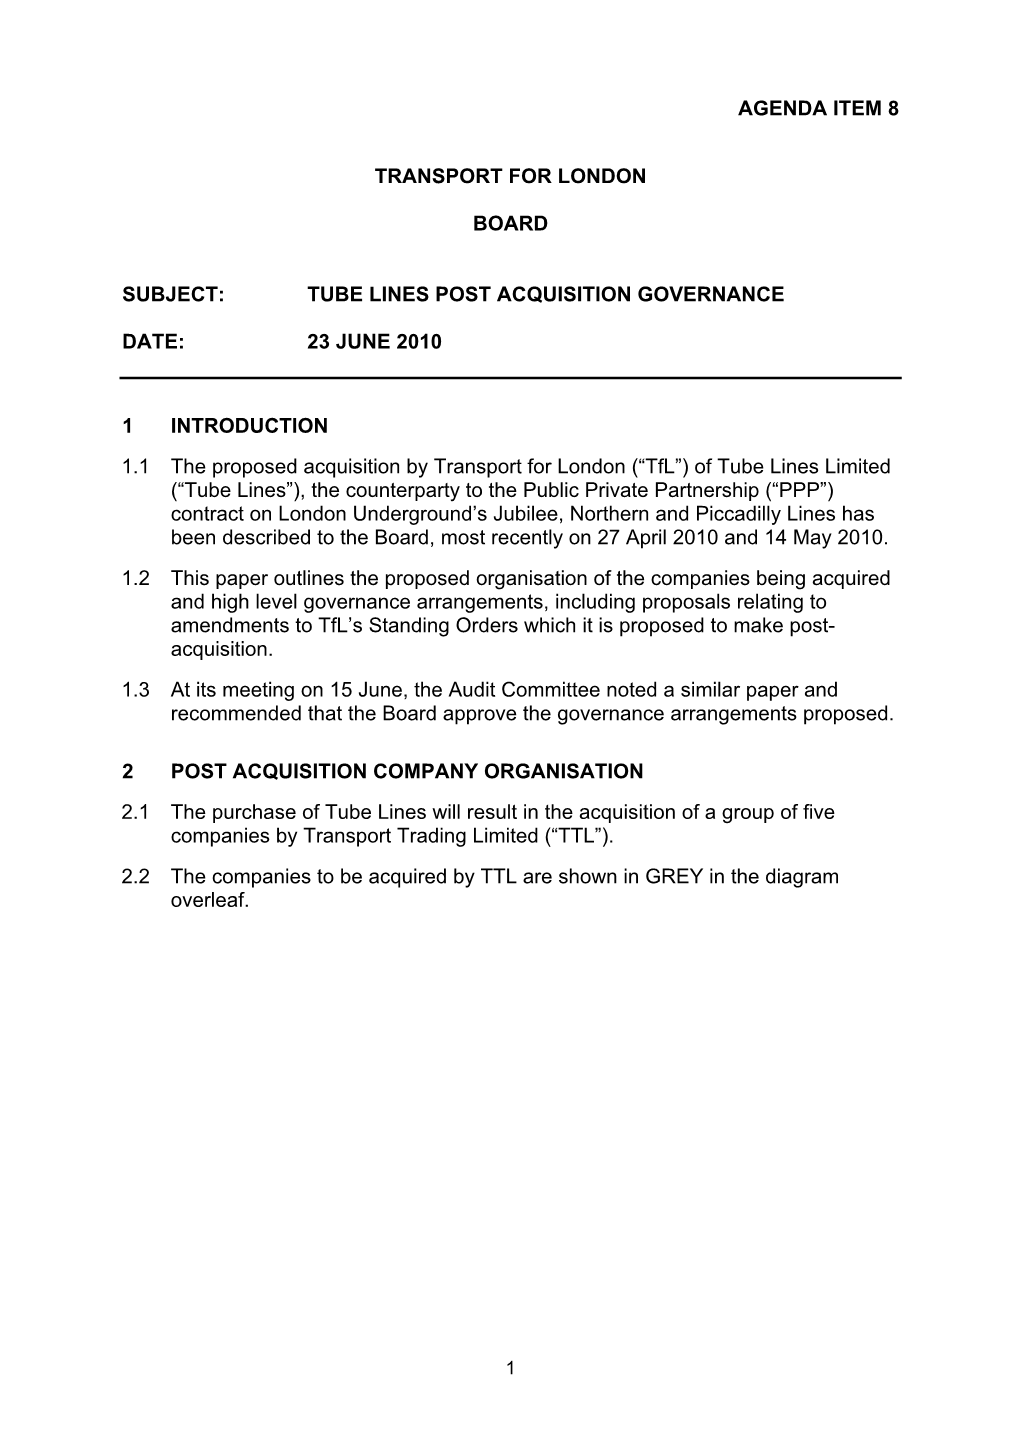 Item 8 Tube Lines Post-Acquisition Governance